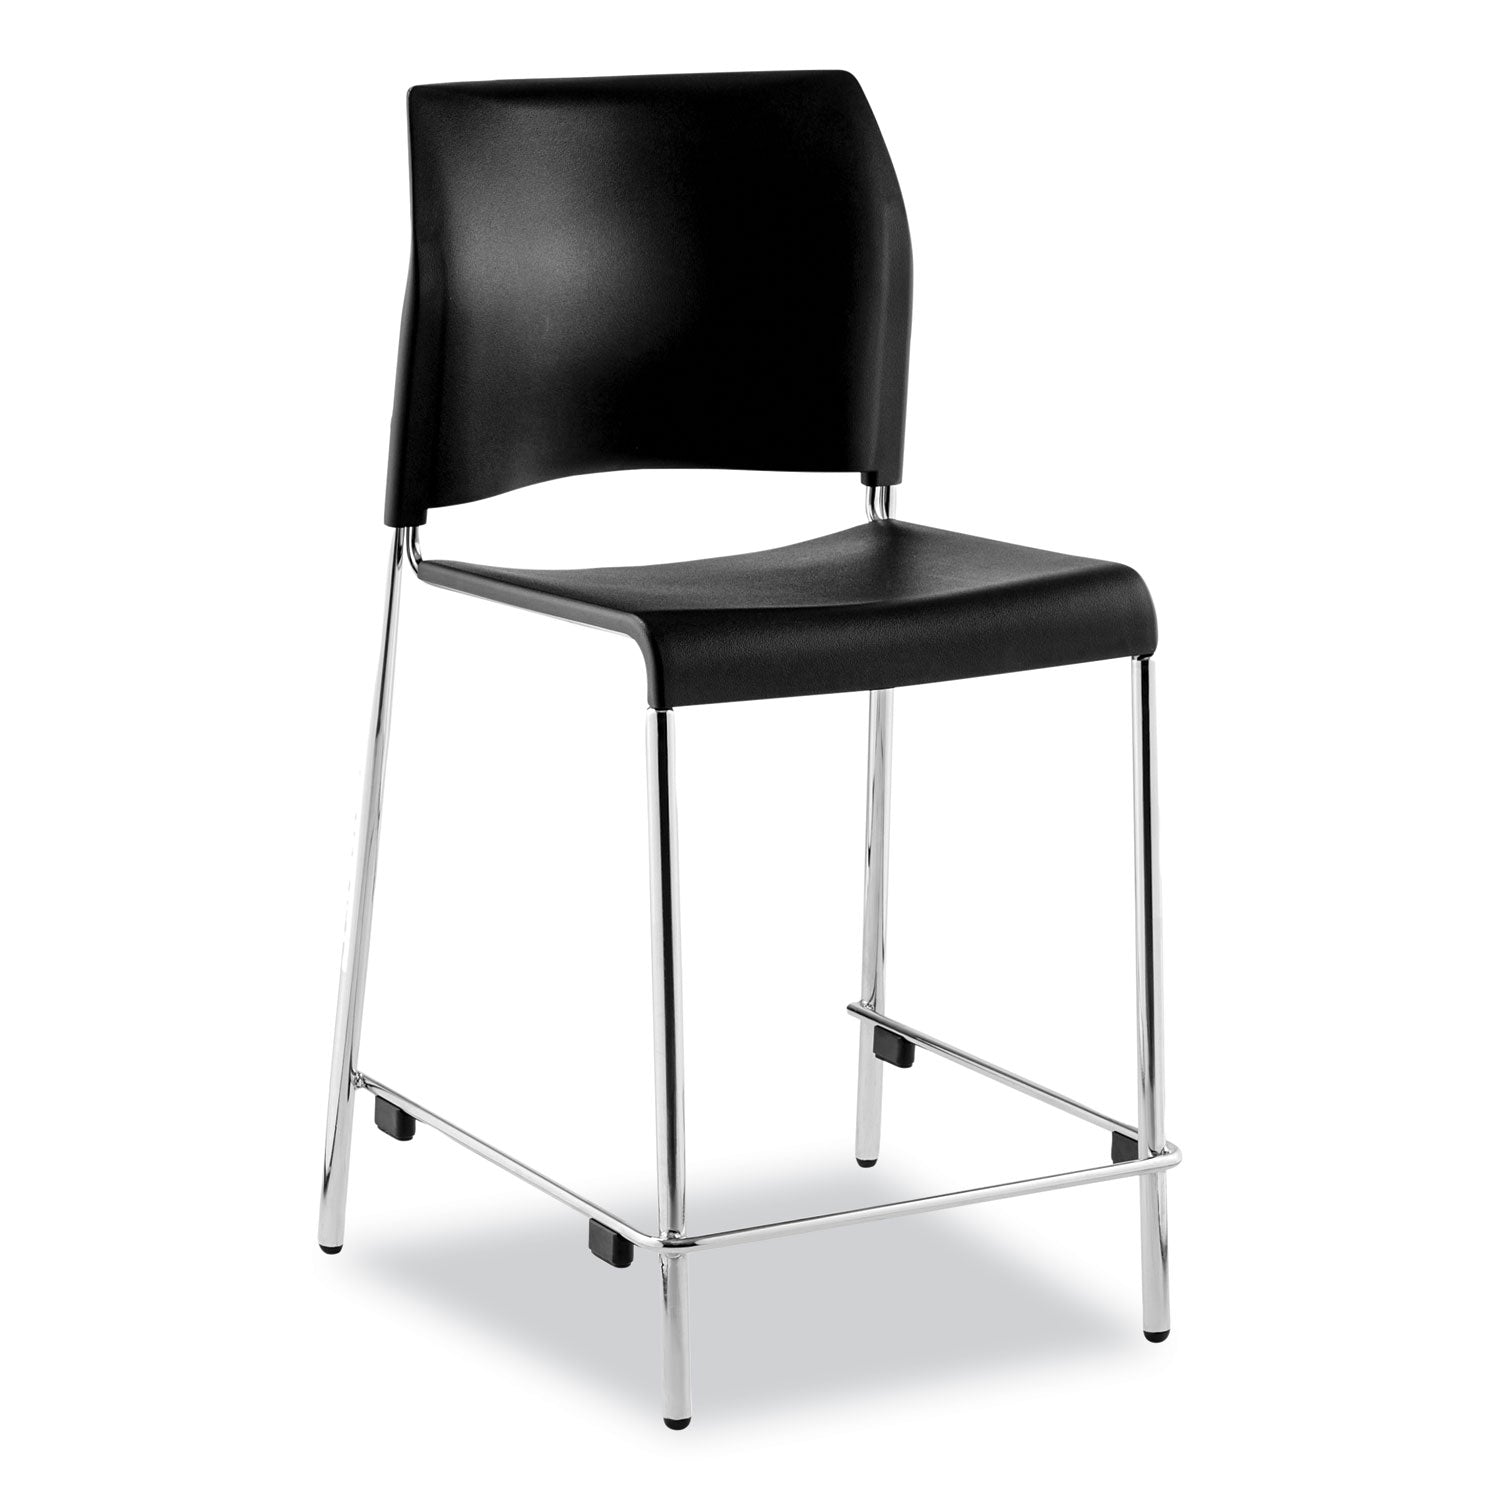 cafetorium-counter-height-stool-supports-up-to-300-lb-24-seat-height-black-seat-back-chrome-base-ships-in-1-3-bus-days_nps8810c1110 - 1